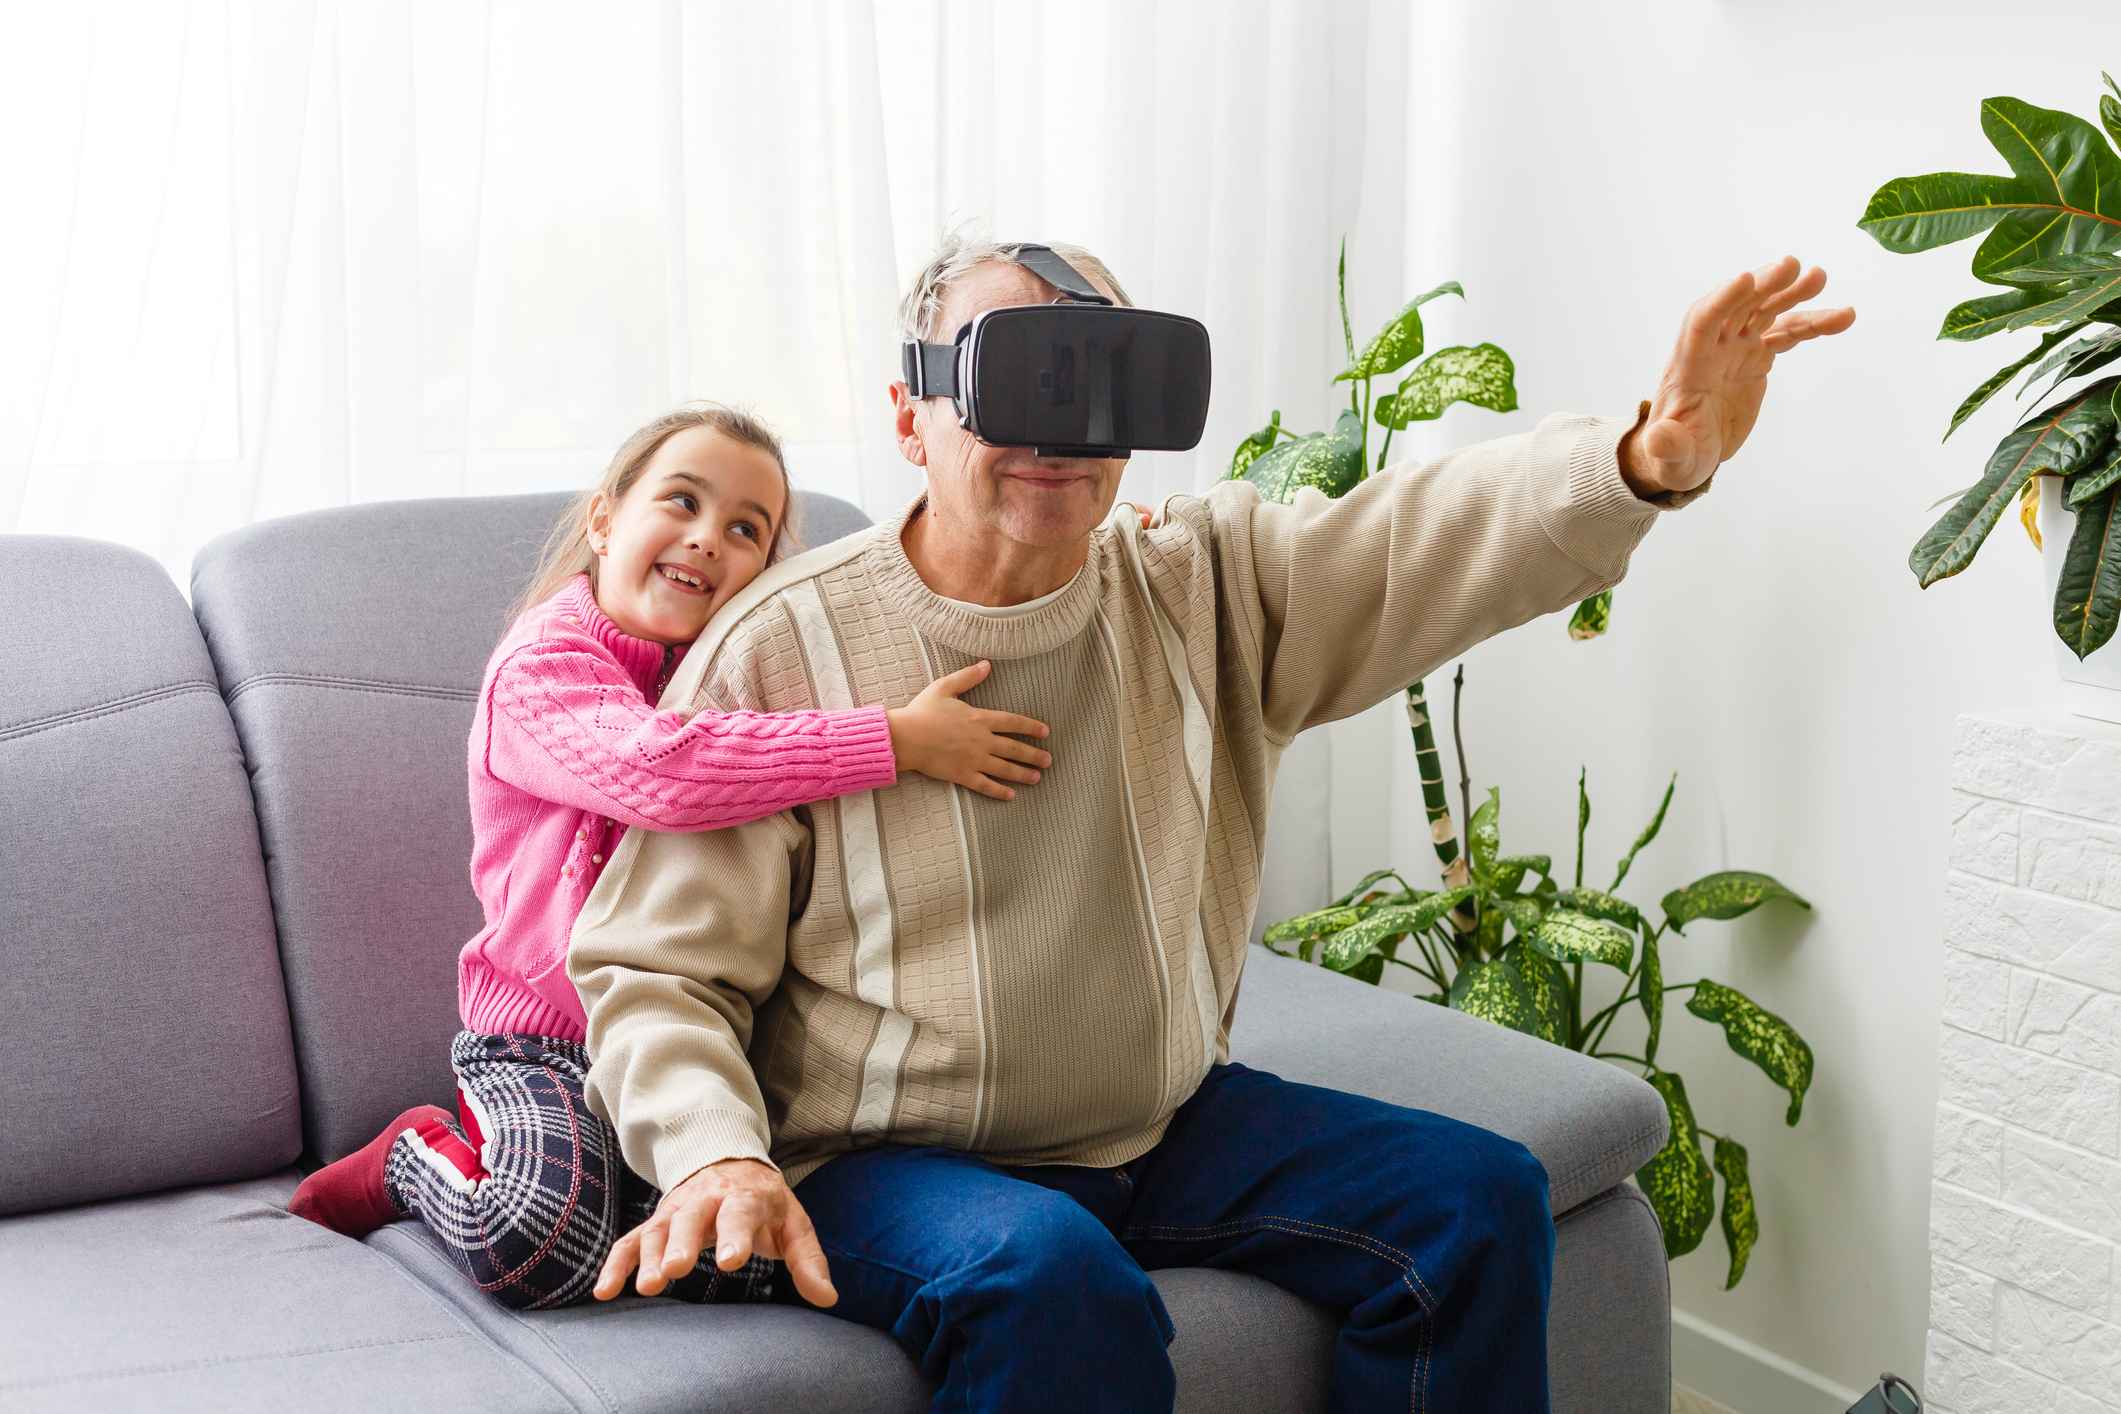 An older man wearing a headset and playing a virutal reality game; his grandchild is seated next to him and embracing him.